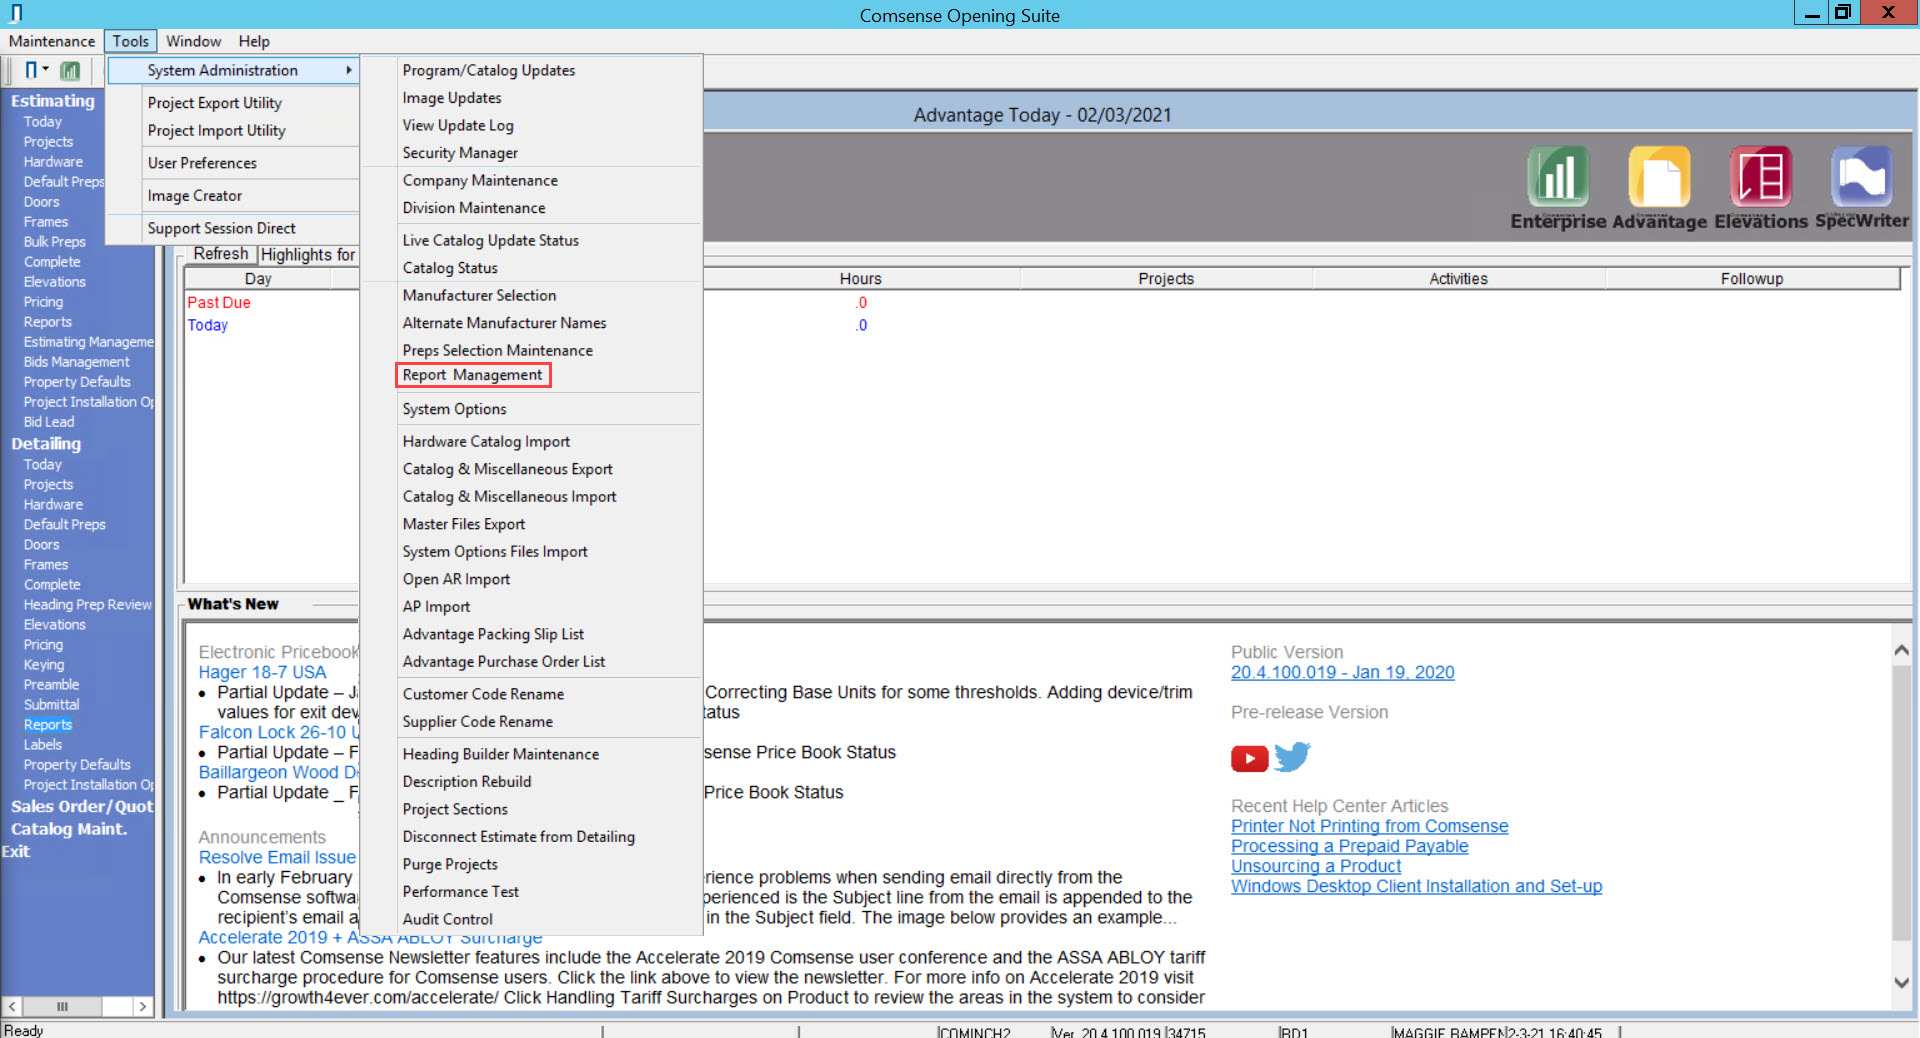 Advantage Today window; shows the pathway to Report Management from the Tools menu.